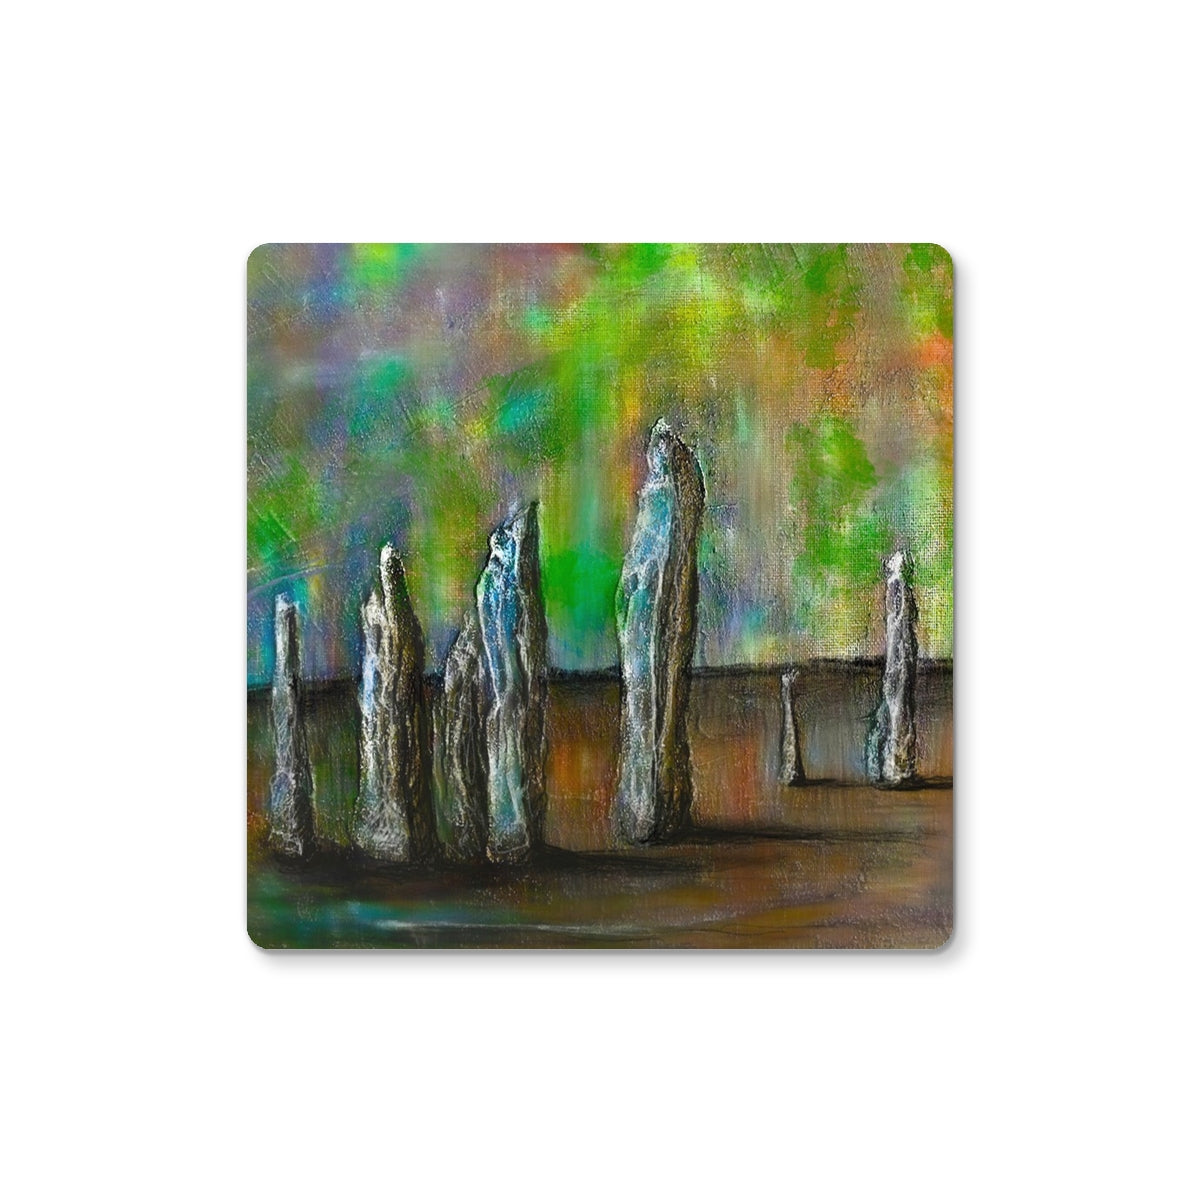 Callanish Northern Lights Art Gifts Coaster-Coasters-Hebridean Islands Art Gallery-2 Coasters-Paintings, Prints, Homeware, Art Gifts From Scotland By Scottish Artist Kevin Hunter